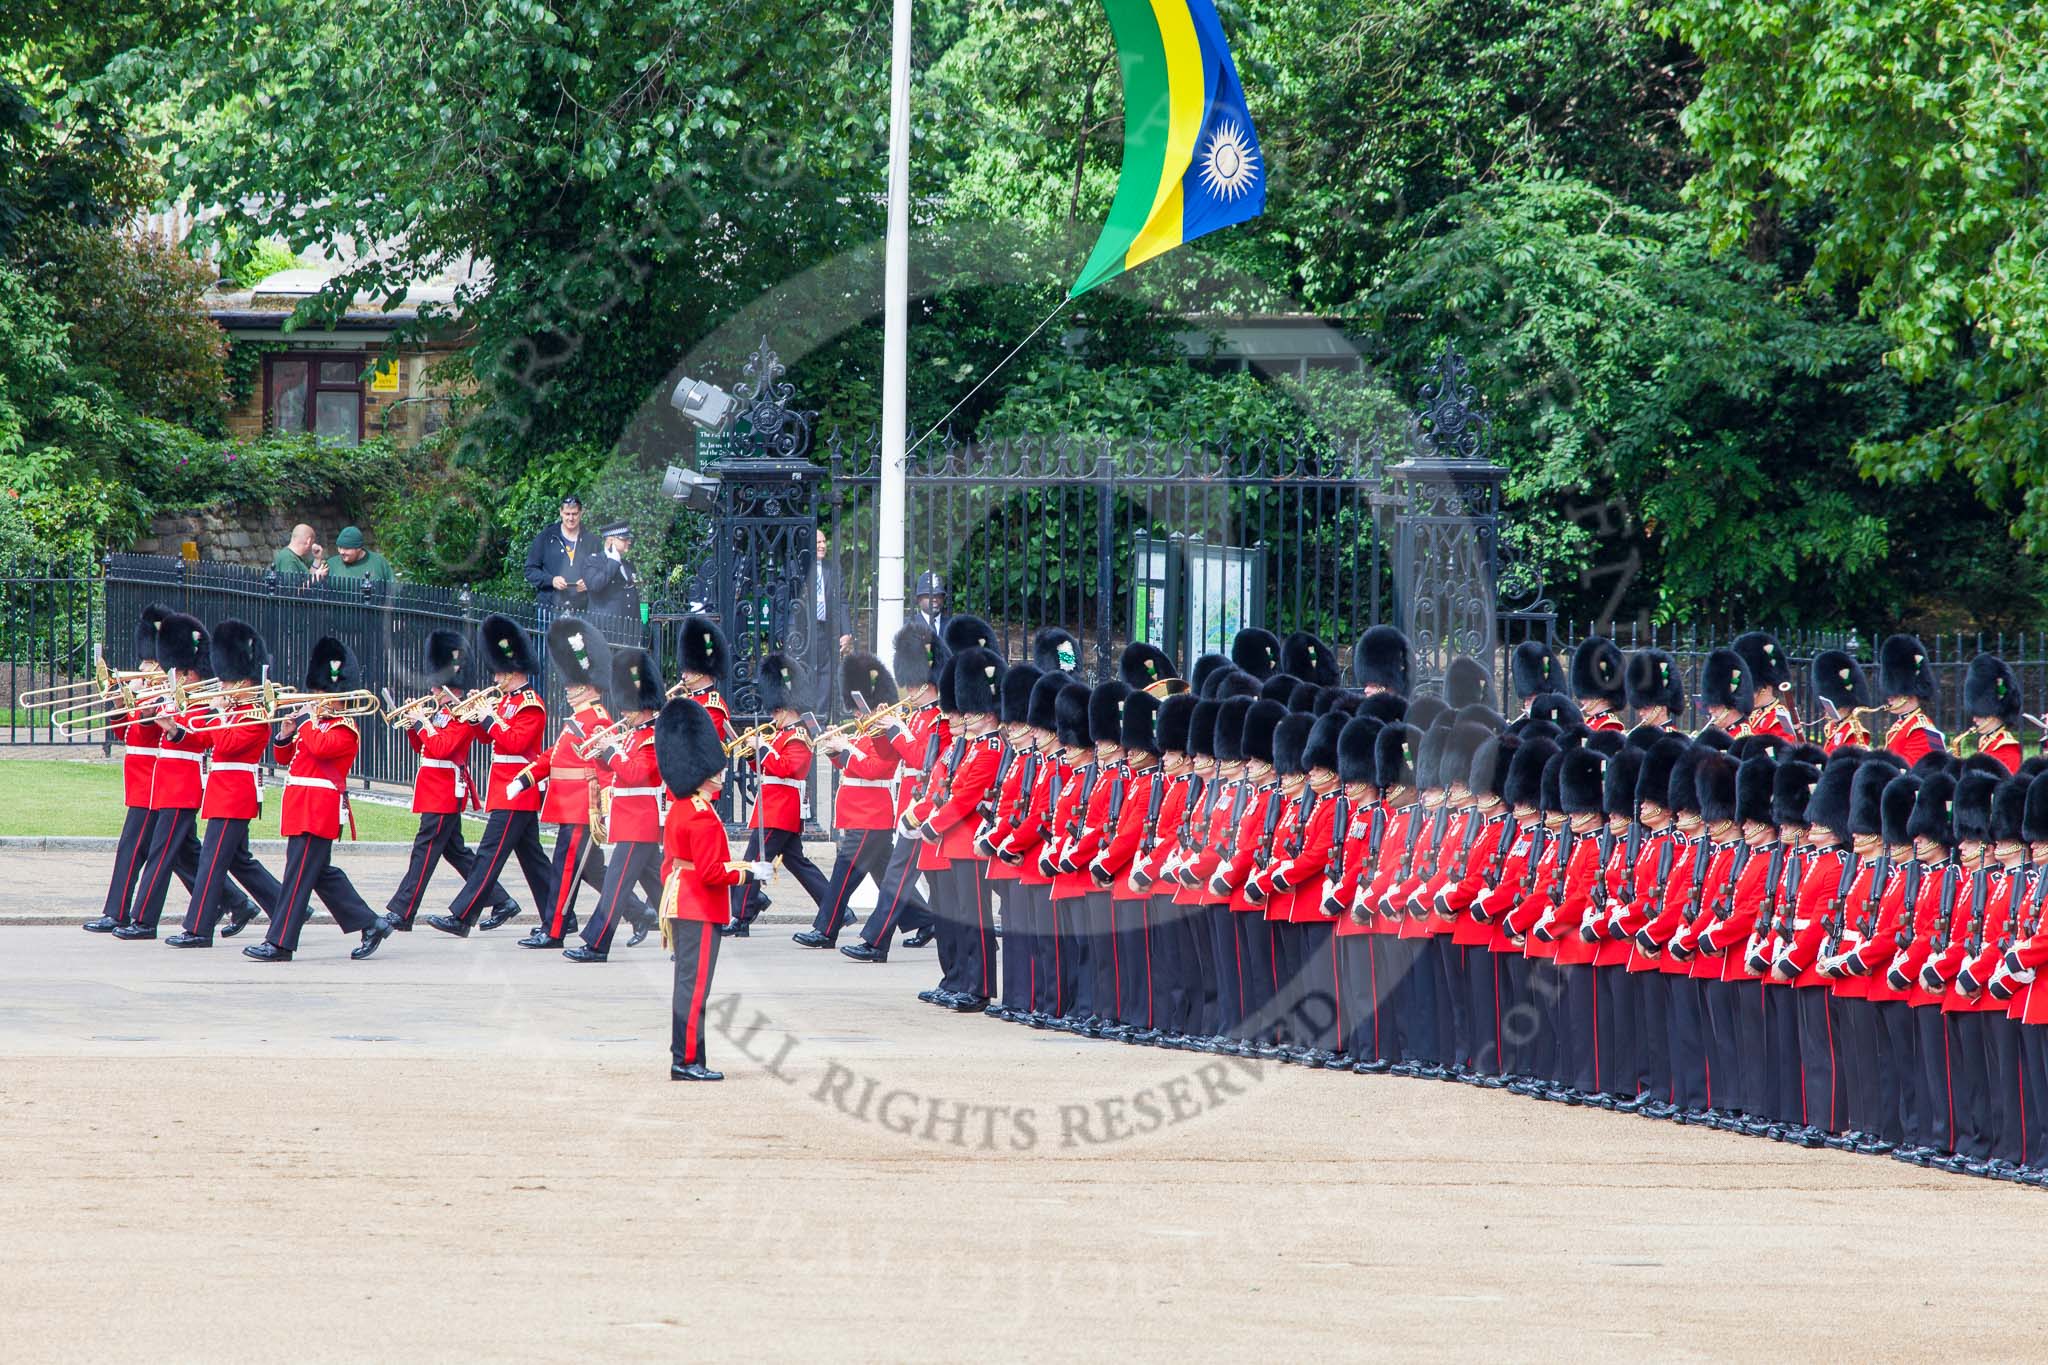 Trooping the Colour 2013: The Band of the Welsh Guards is marching along the St James's Park side of Horse Guards parade, here passing No. 3 Guard, , 1st Battalion Welsh Guards. Image #104, 15 June 2013 10:30 Horse Guards Parade, London, UK